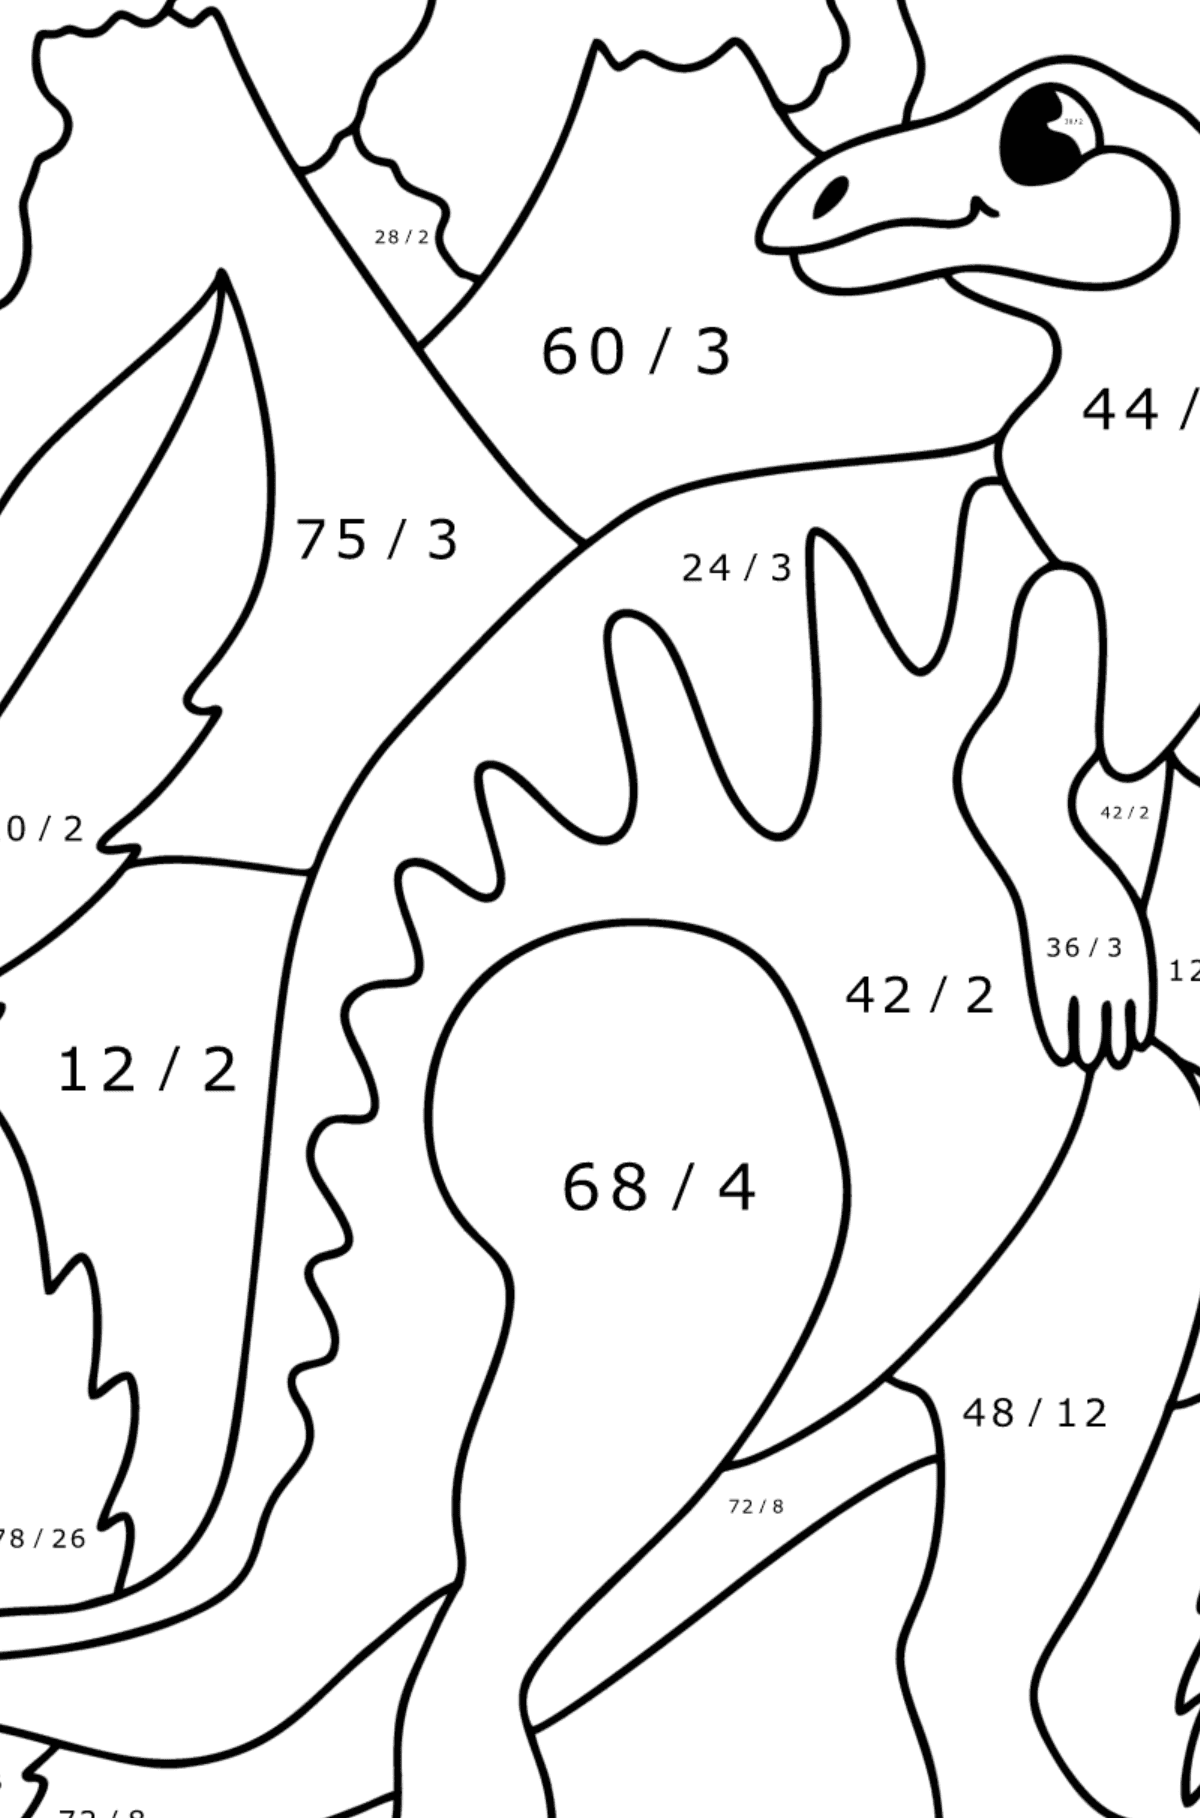 Hadrosaur coloring page - Math Coloring - Division for Kids